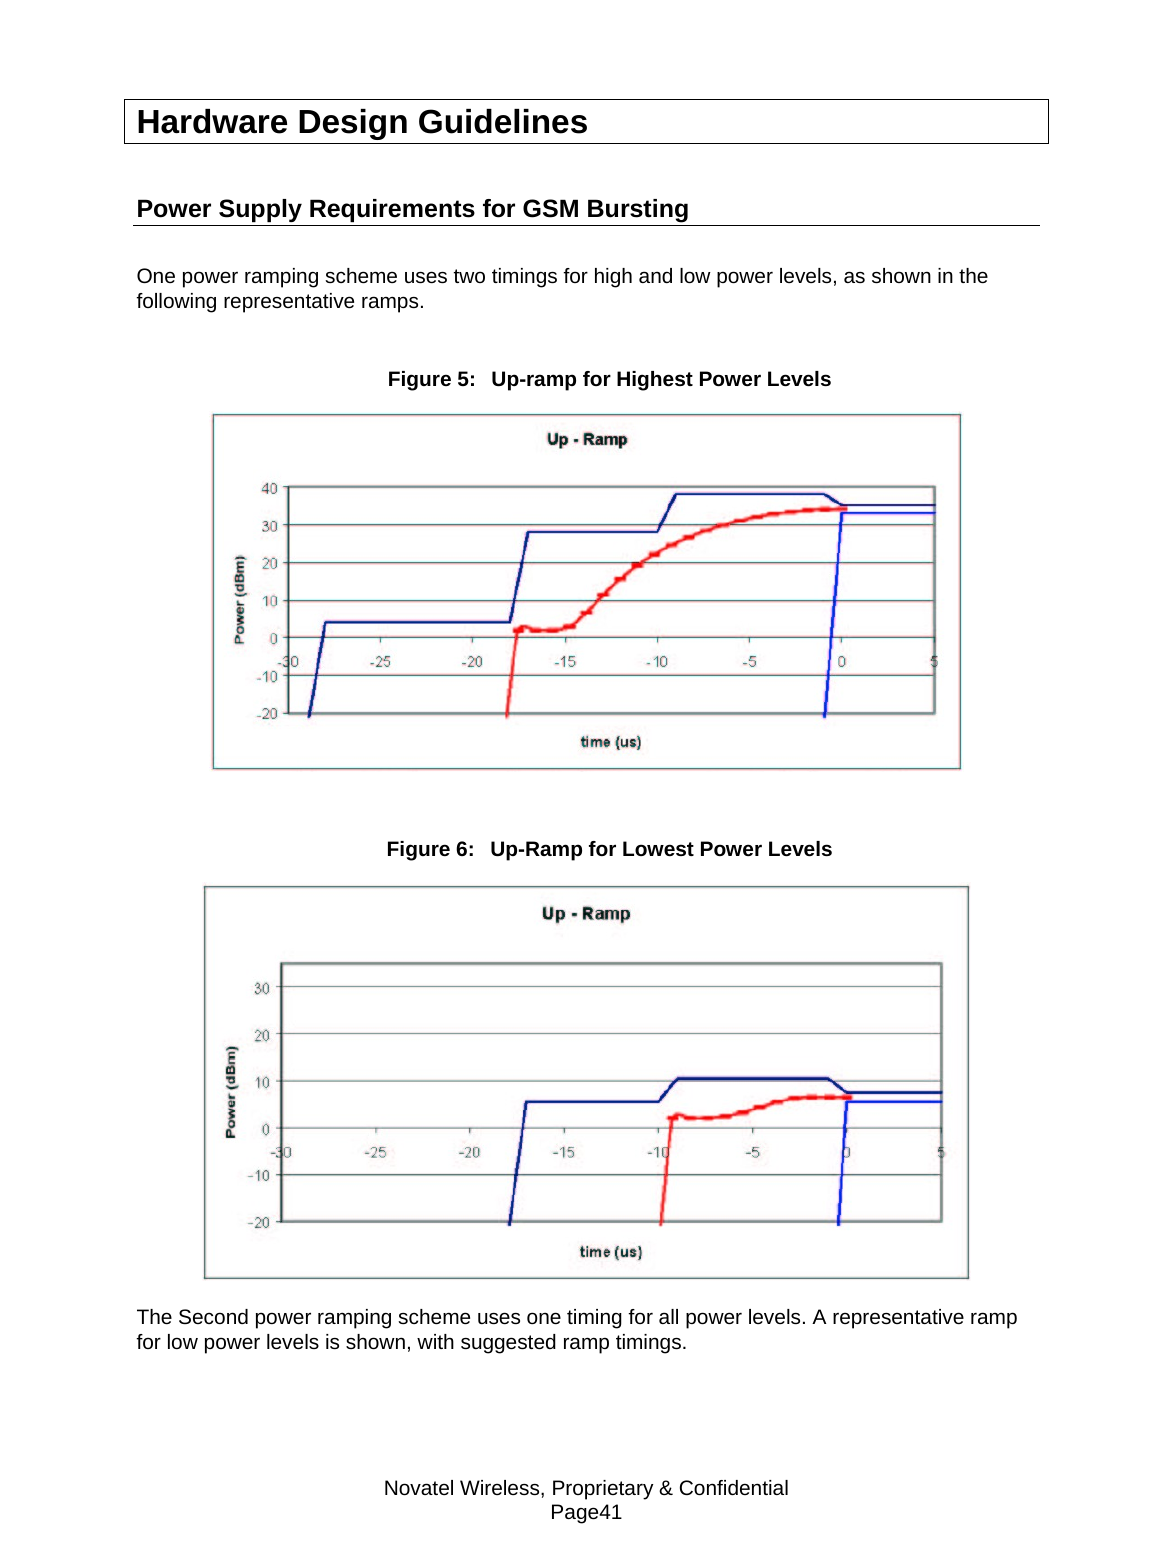 Novatel Wireless, Proprietary &amp; Confidential Page41 Hardware Design Guidelines Power Supply Requirements for GSM Bursting One power ramping scheme uses two timings for high and low power levels, as shown in the following representative ramps. Figure 5:  Up-ramp for Highest Power Levels   Figure 6:  Up-Ramp for Lowest Power Levels   The Second power ramping scheme uses one timing for all power levels. A representative ramp for low power levels is shown, with suggested ramp timings. 